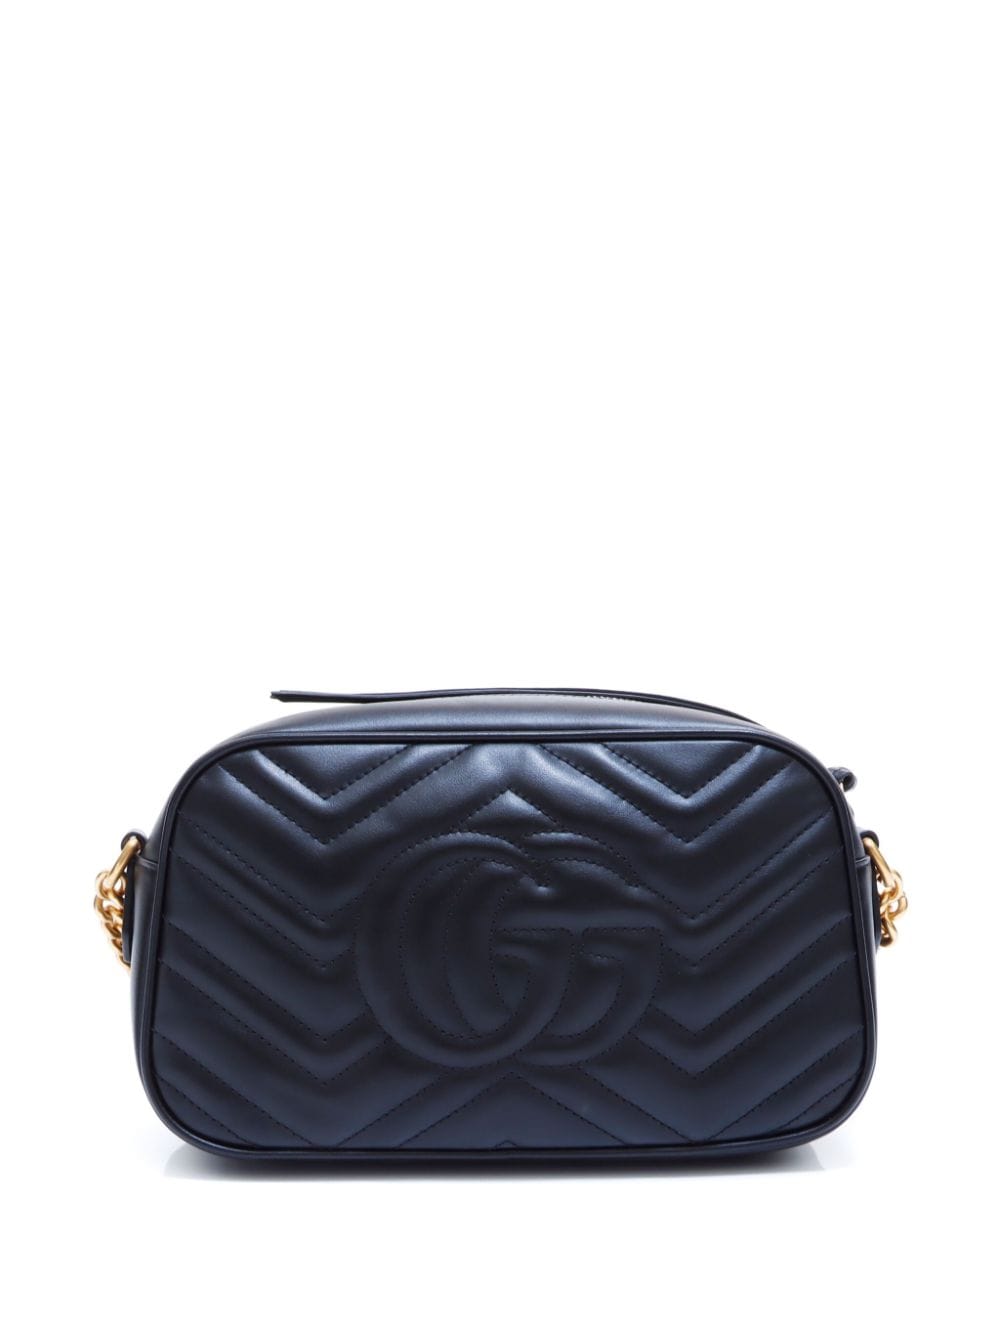 Pre-owned Gucci Gg Marmont Shoulder Bag In Black